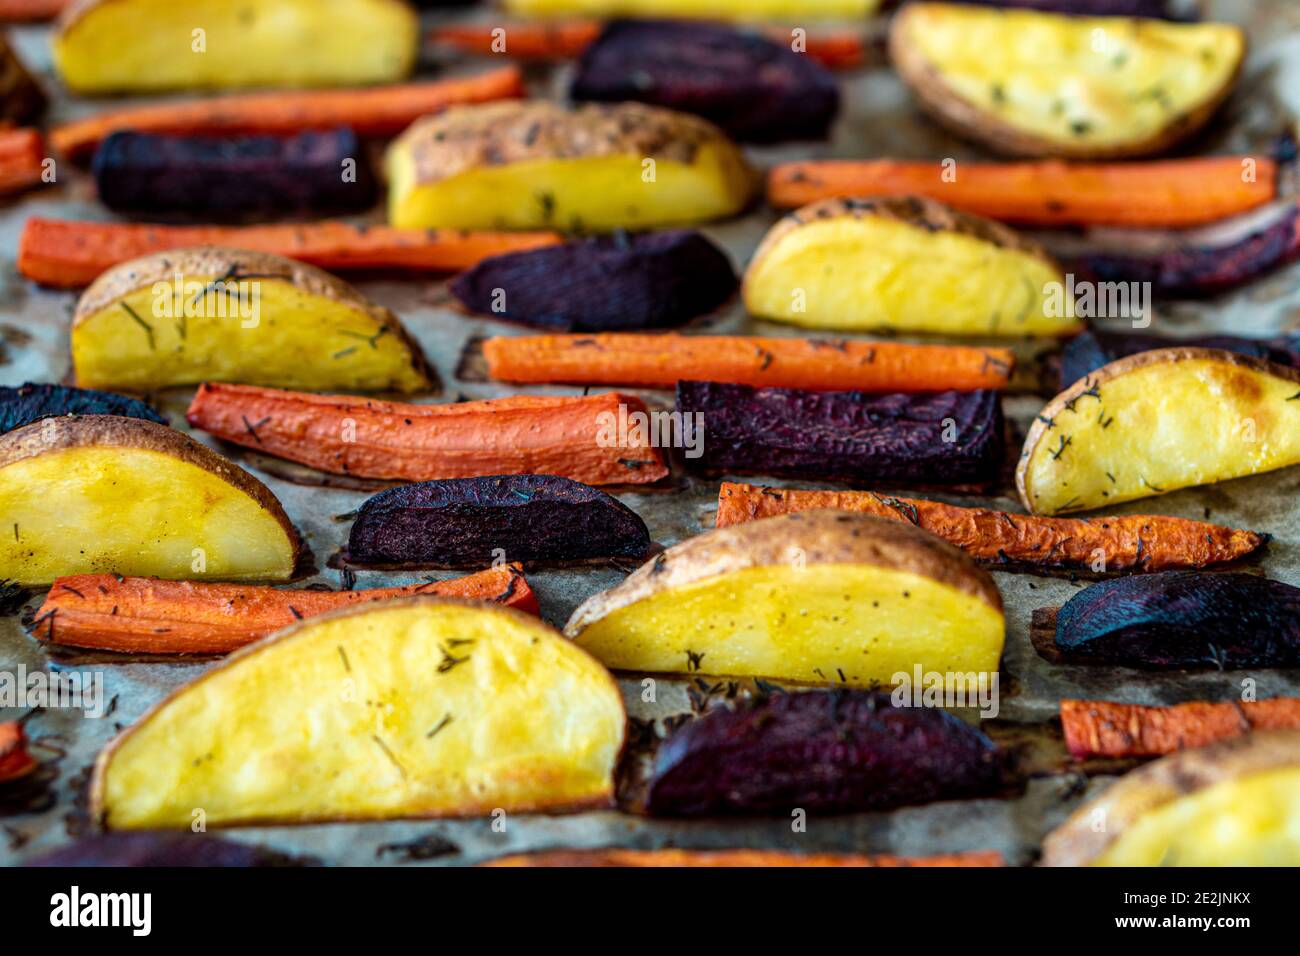 restaurant, vegetarianism, fast, healthy food, recipes concepts - Oven baked cut vegetables potatoes carrots, beets with seasoning dill. Roasted Stock Photo